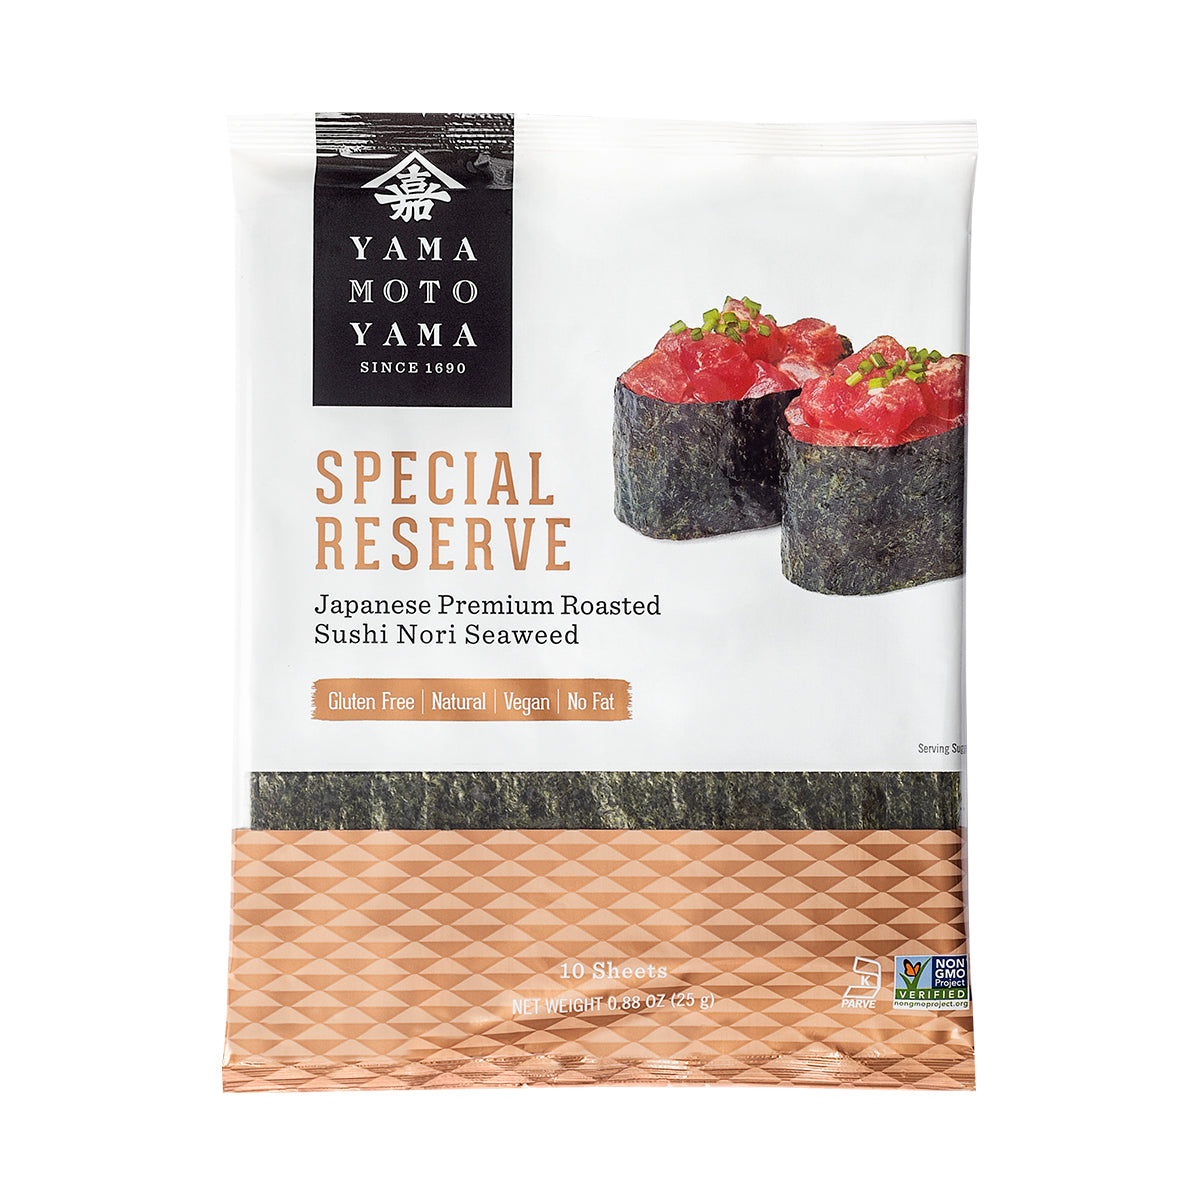 Special Reserve: Roasted Sushi Nori Seaweed